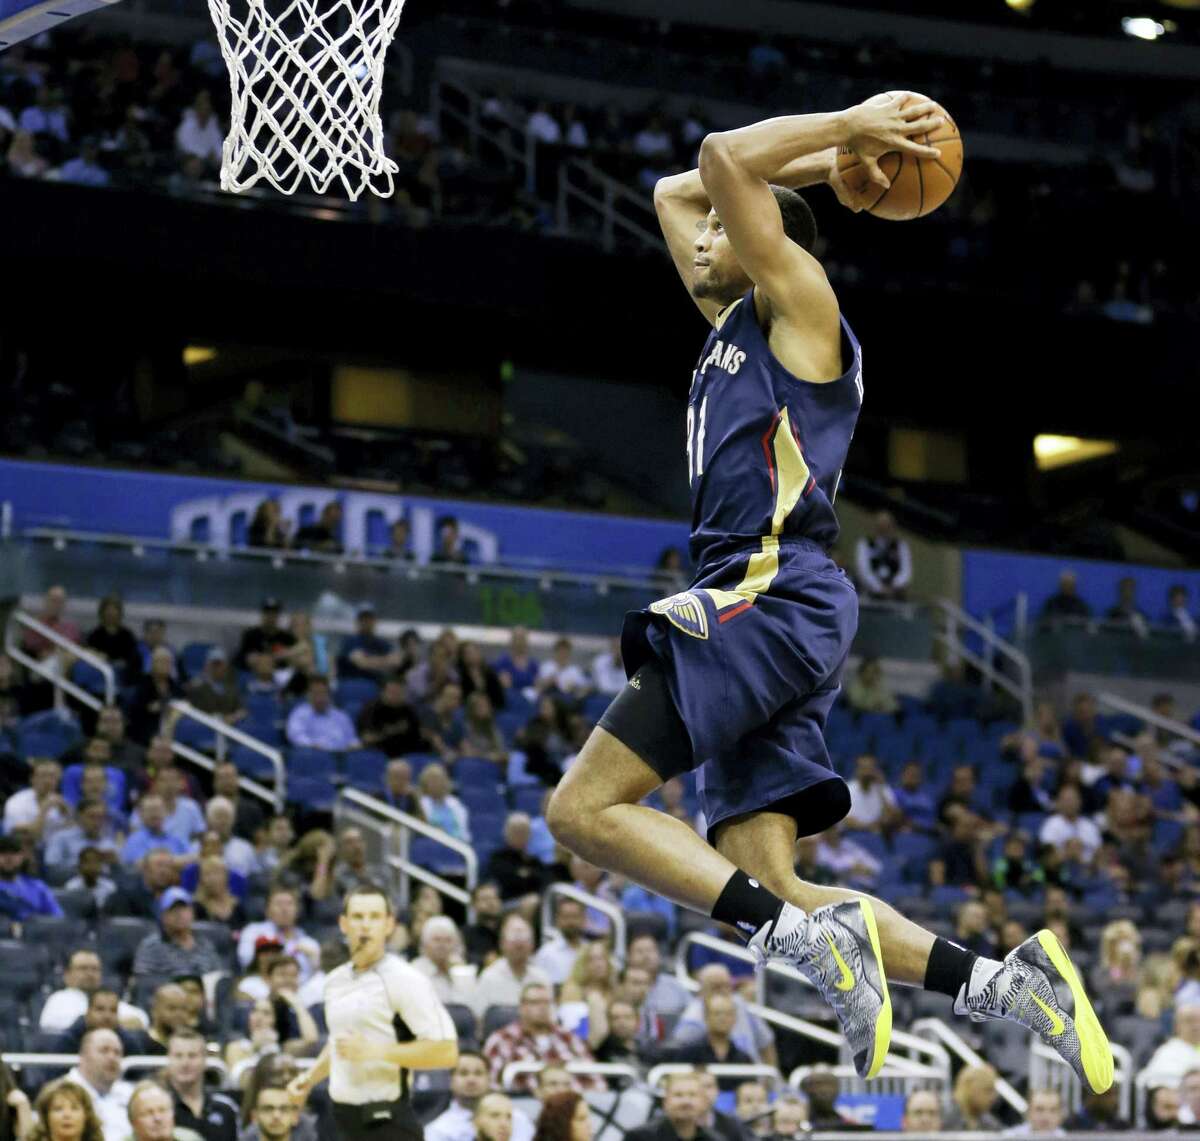 New Orleans Pelicans’ Bryce Dejean-Jones was fatally shot after breaking down the door to a Dallas apartment on Saturday.